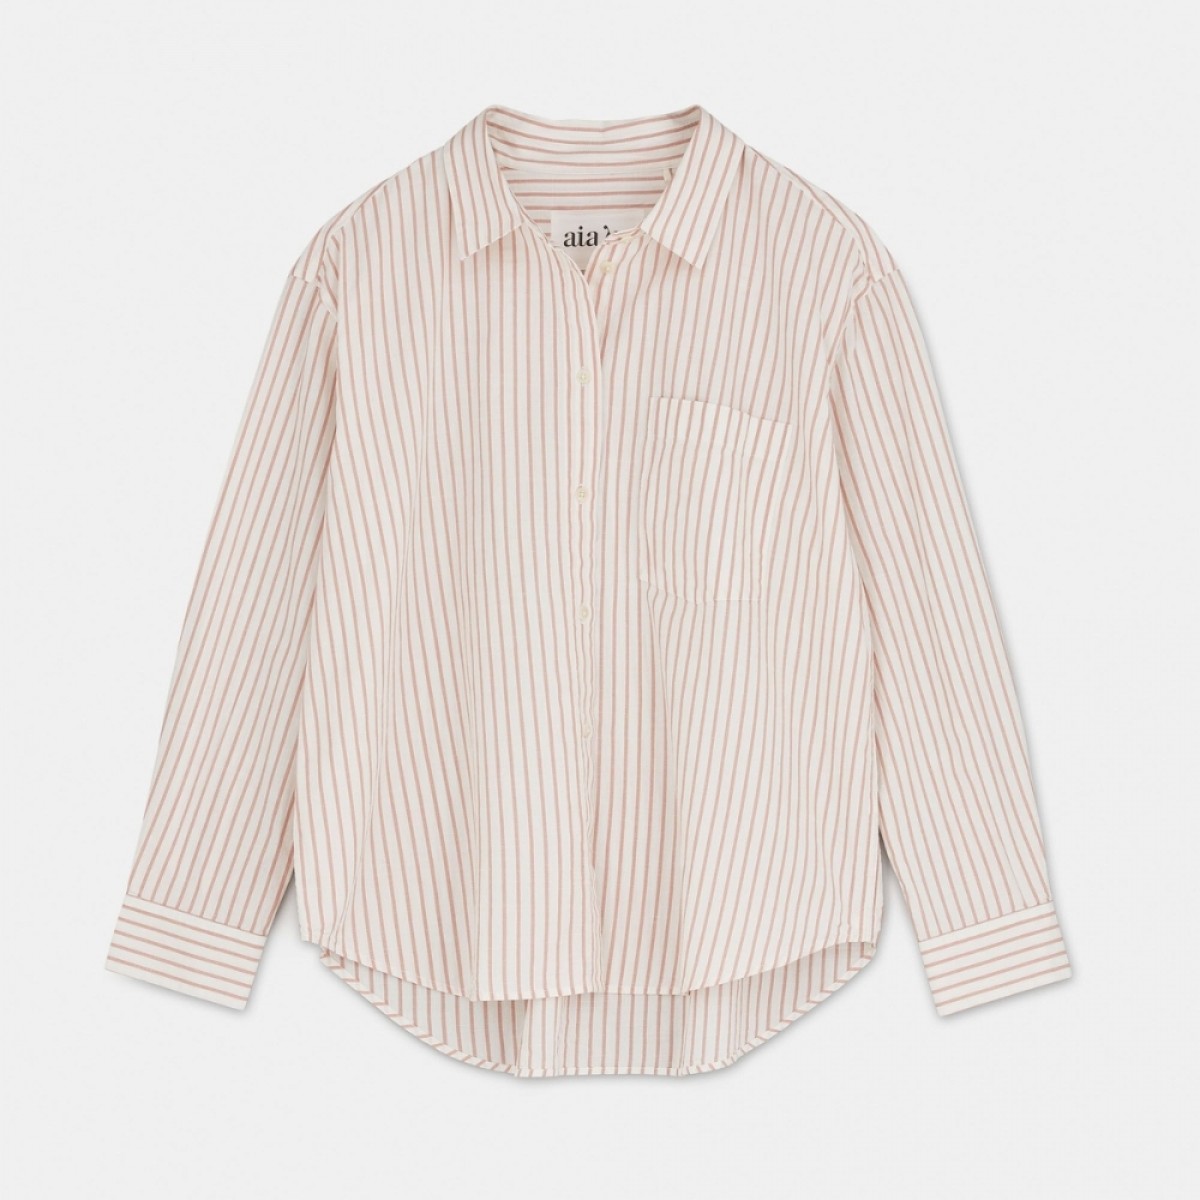 lala shirt striped - mix old rose - front